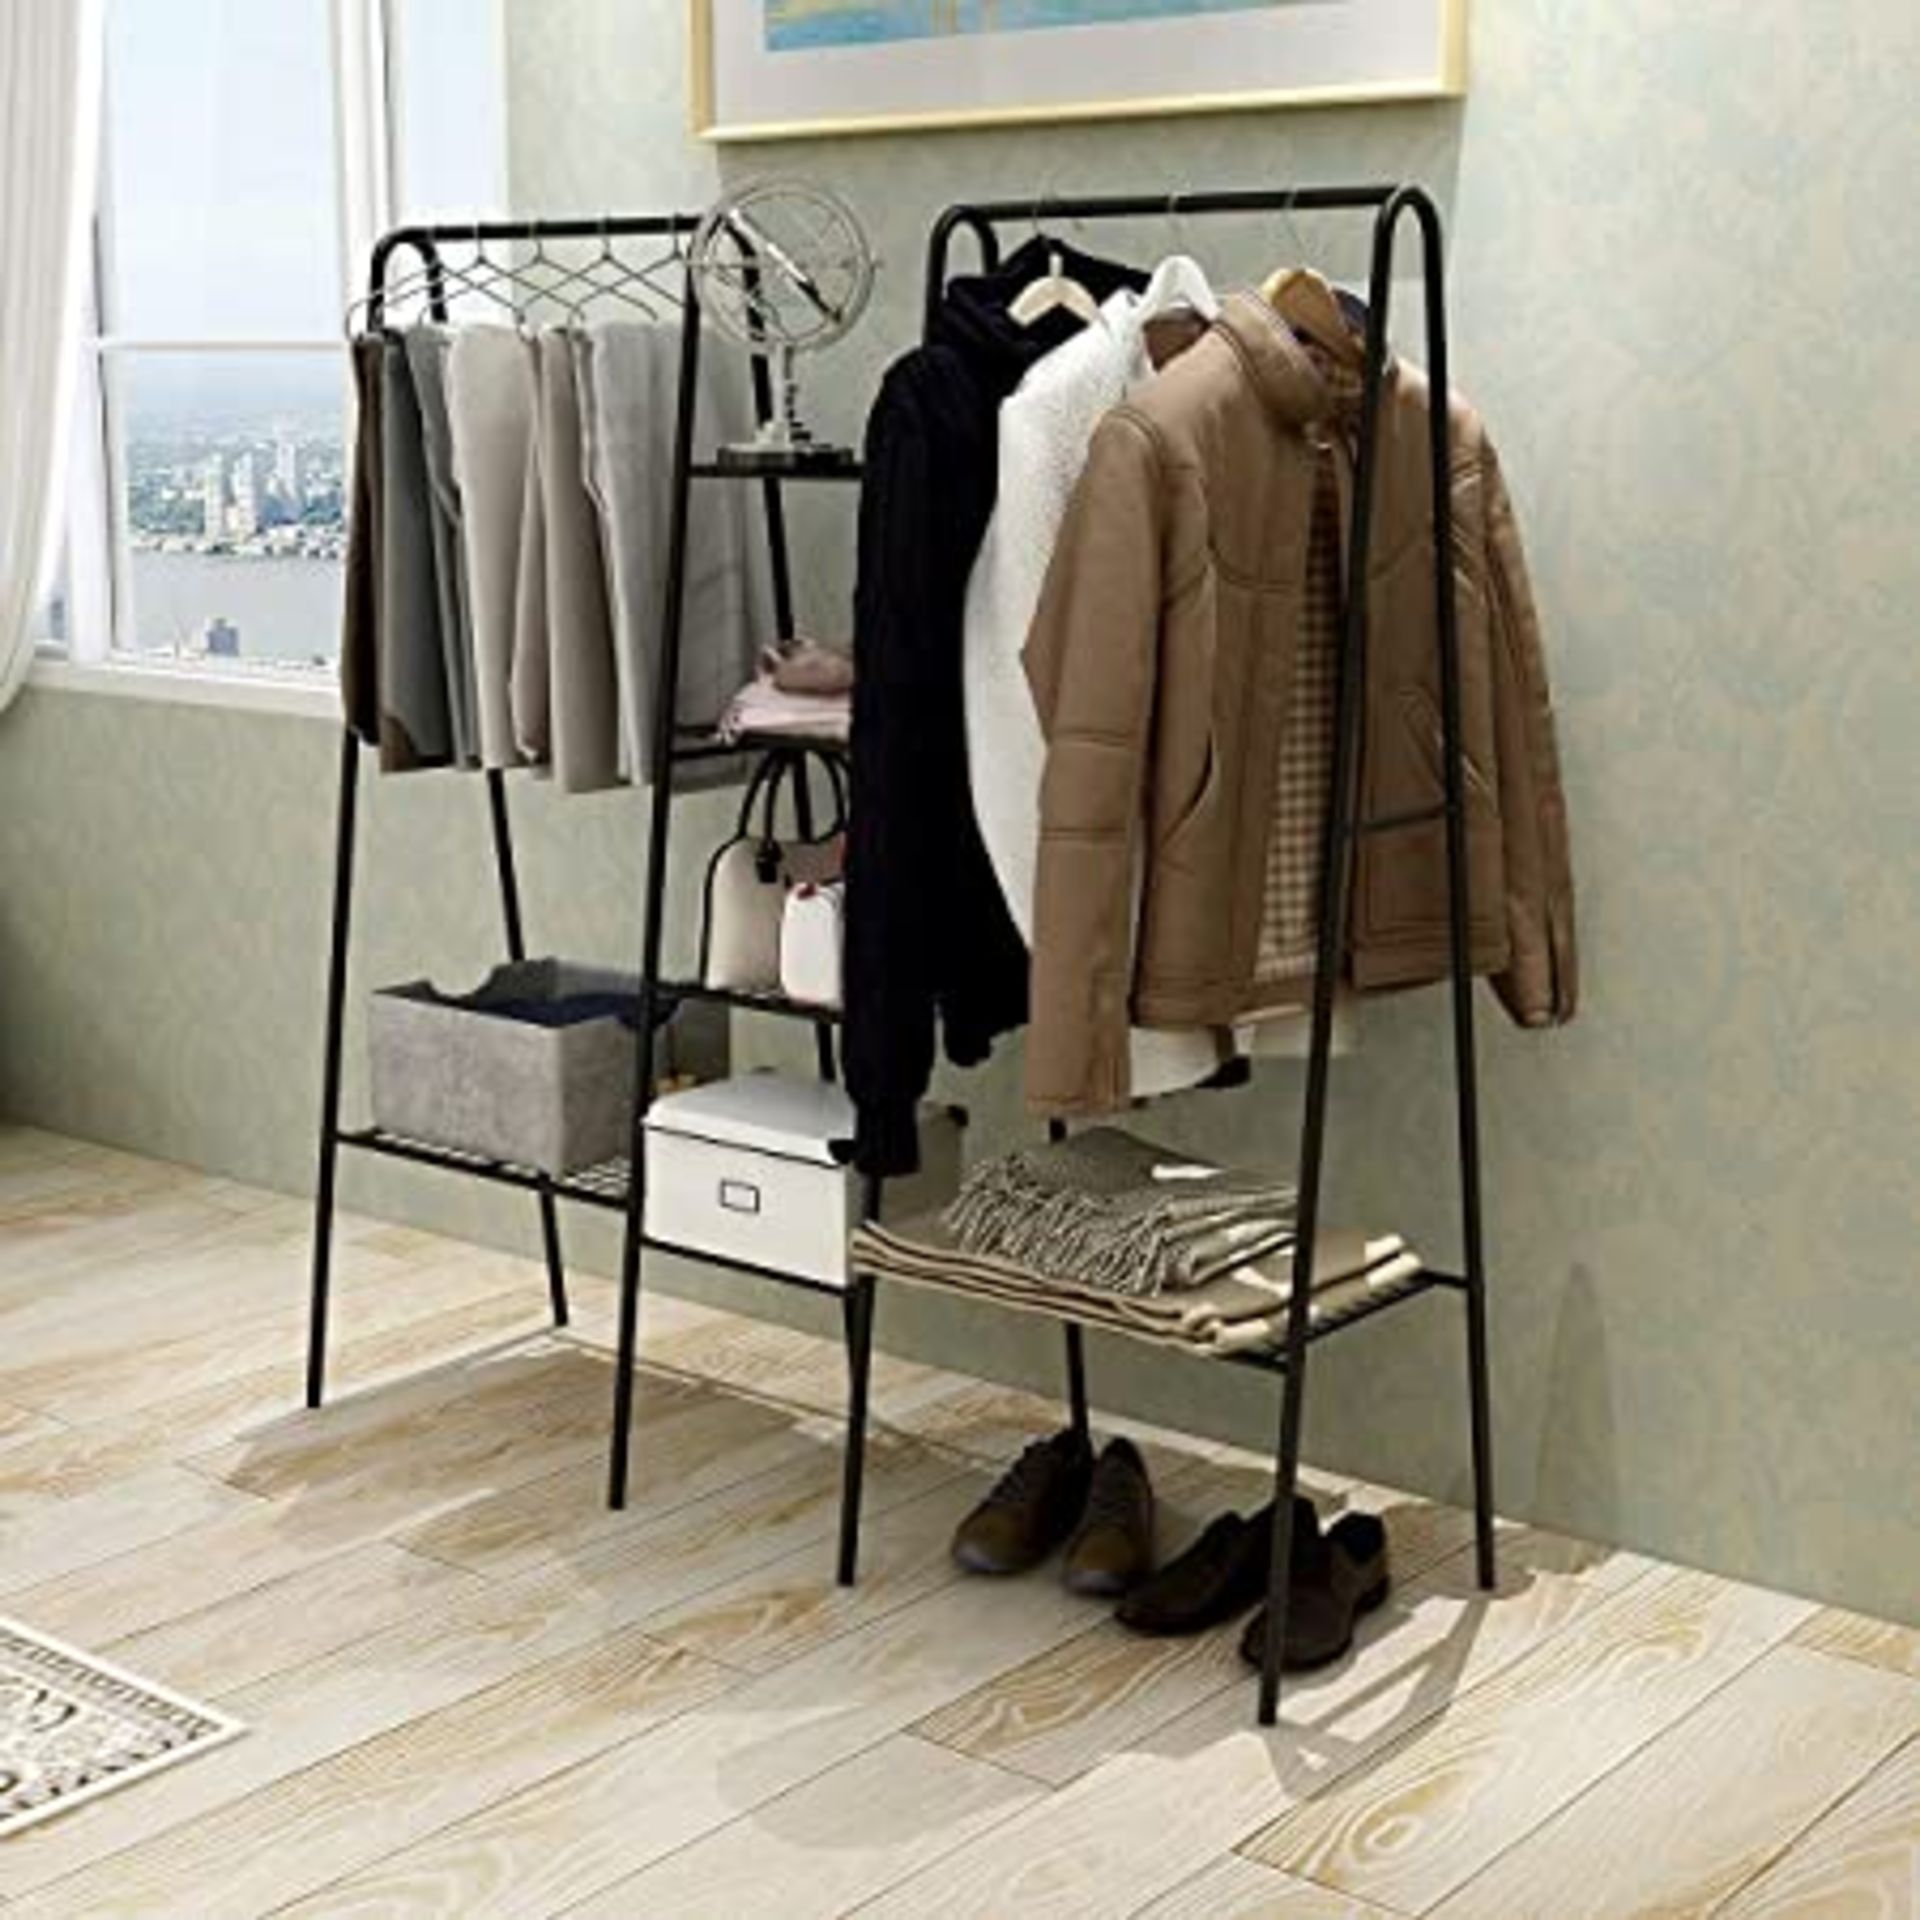 BOXED HEAVY DUTY STORAGE WITH SHOE SHELVES 716B-BK RRP £45.99 (ASD SEEN IN WAYFAIR)Condition